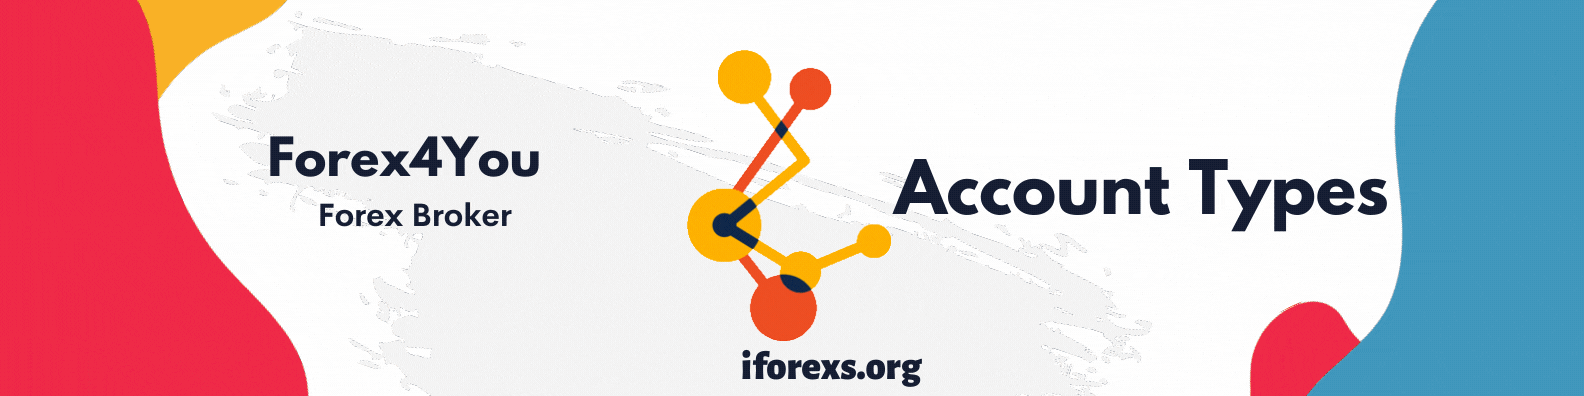 Forex4You Account Types